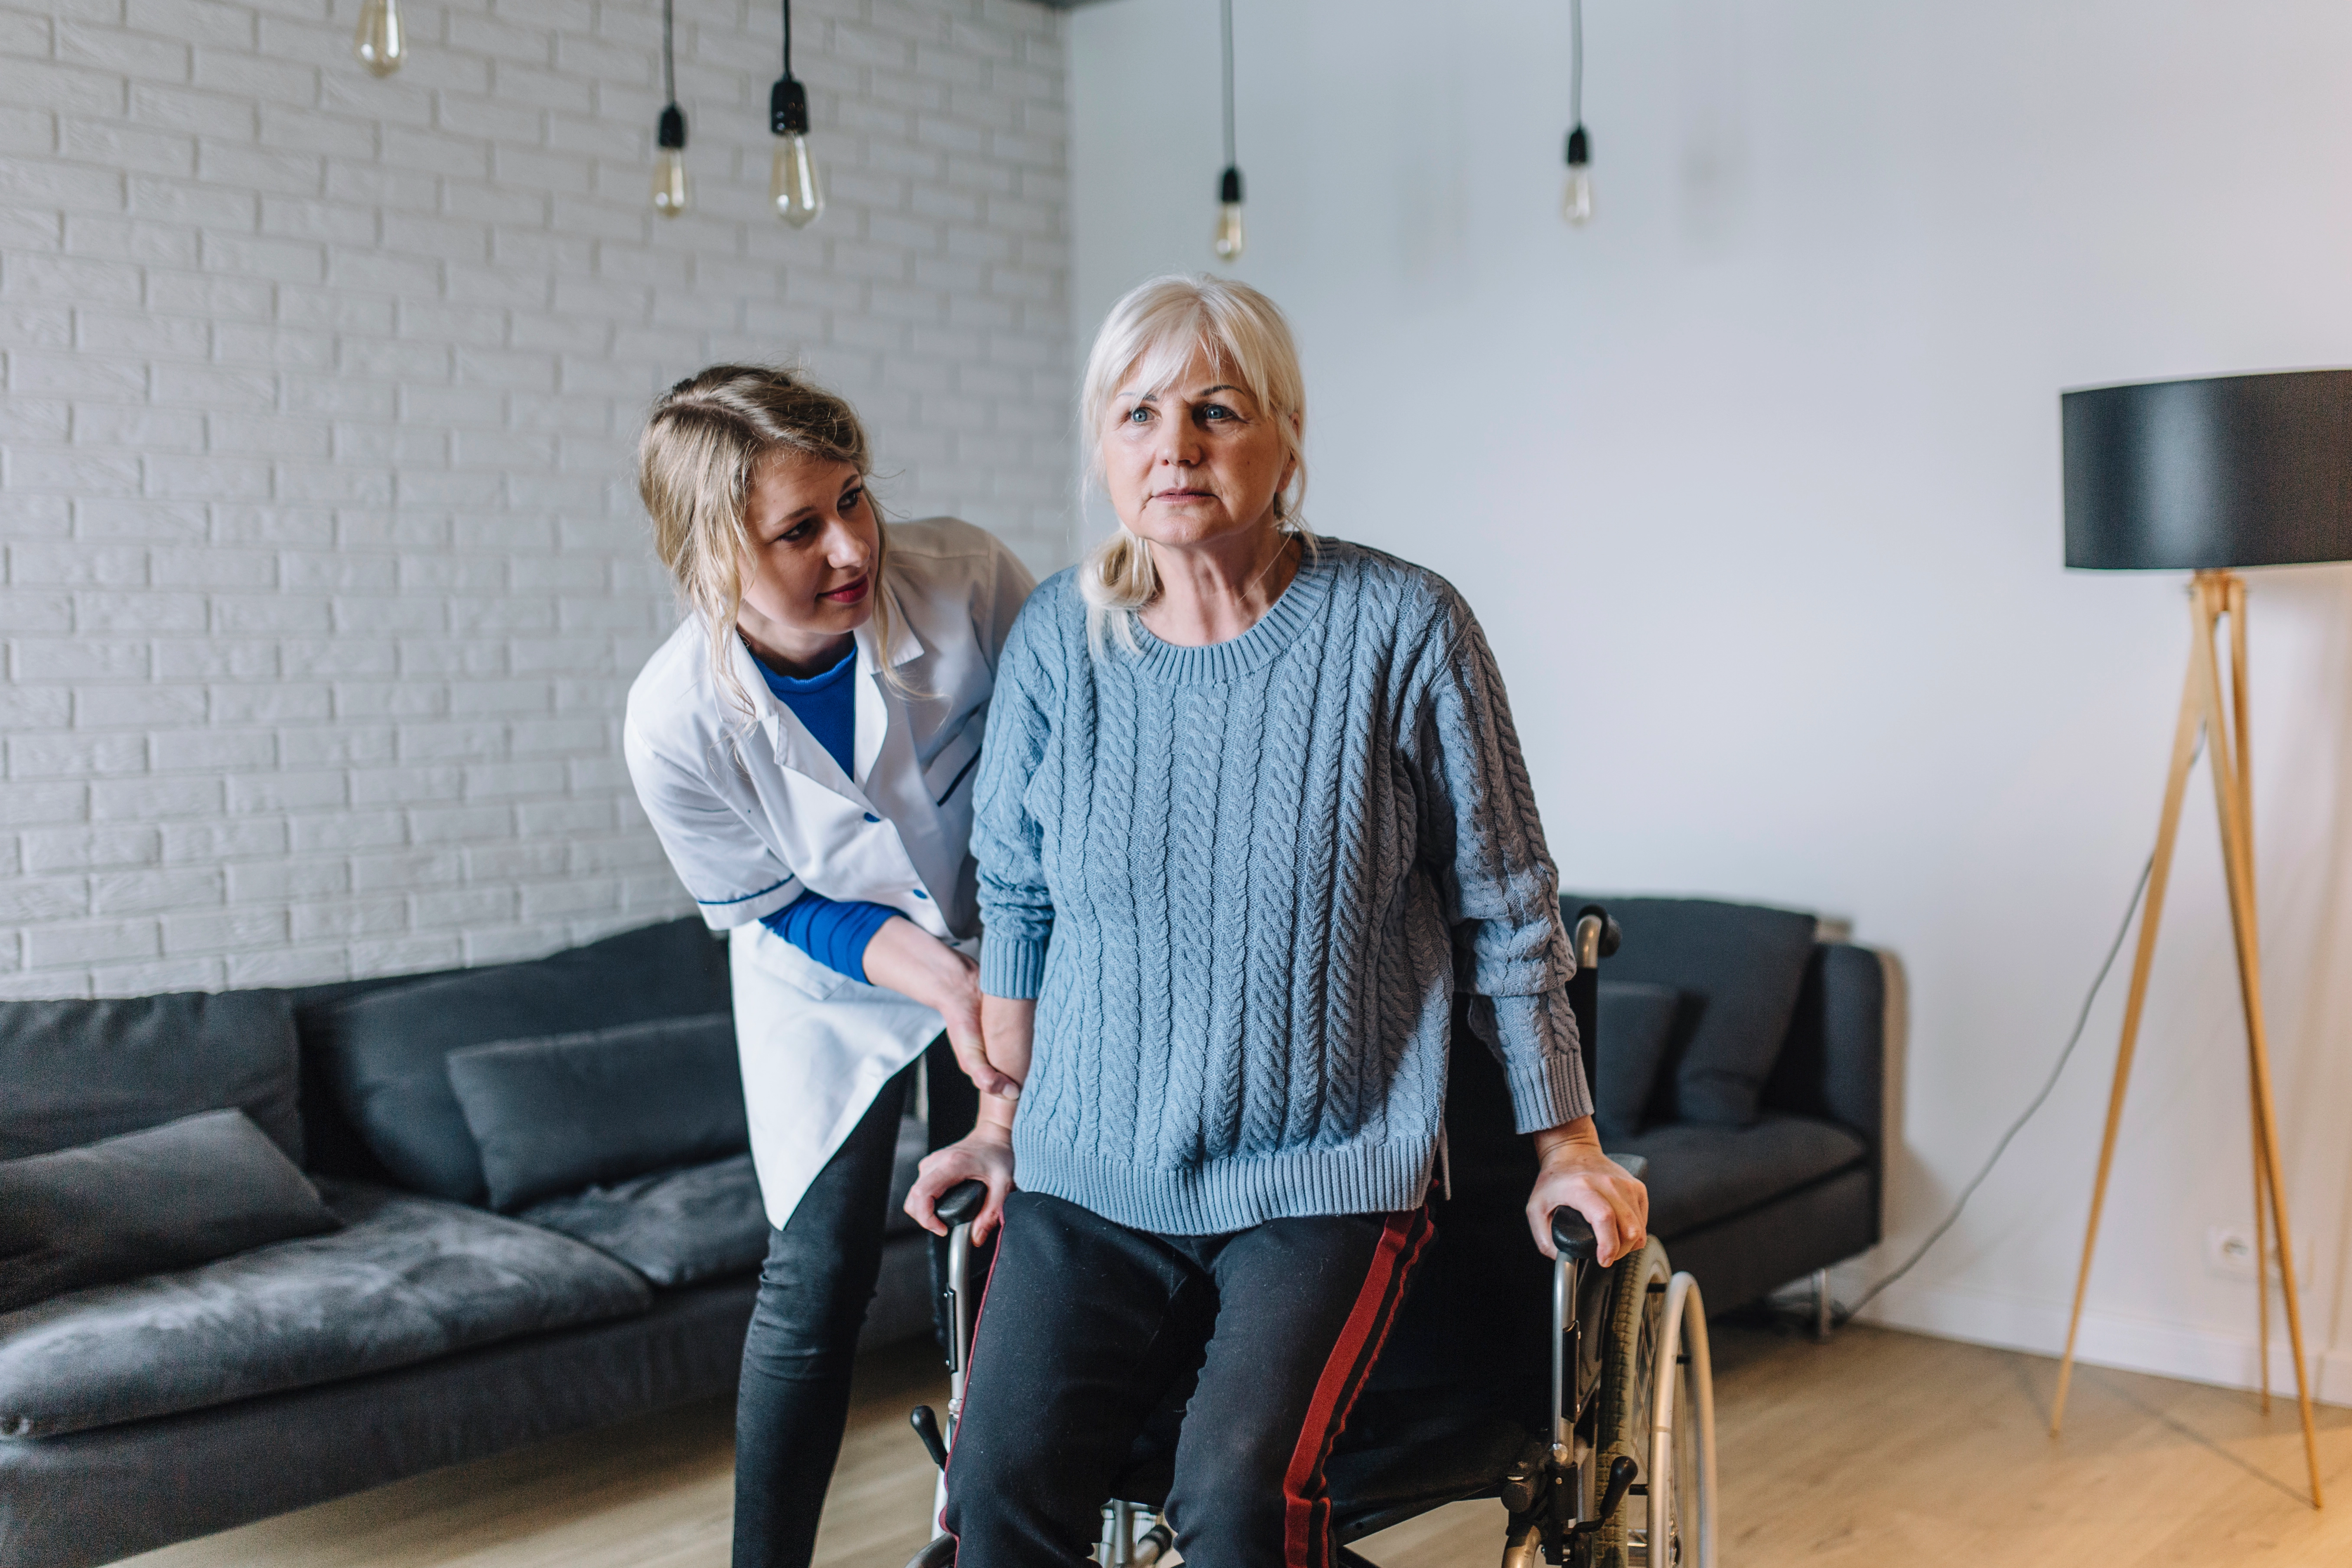 The image shows the care assistant to help the patient to walk